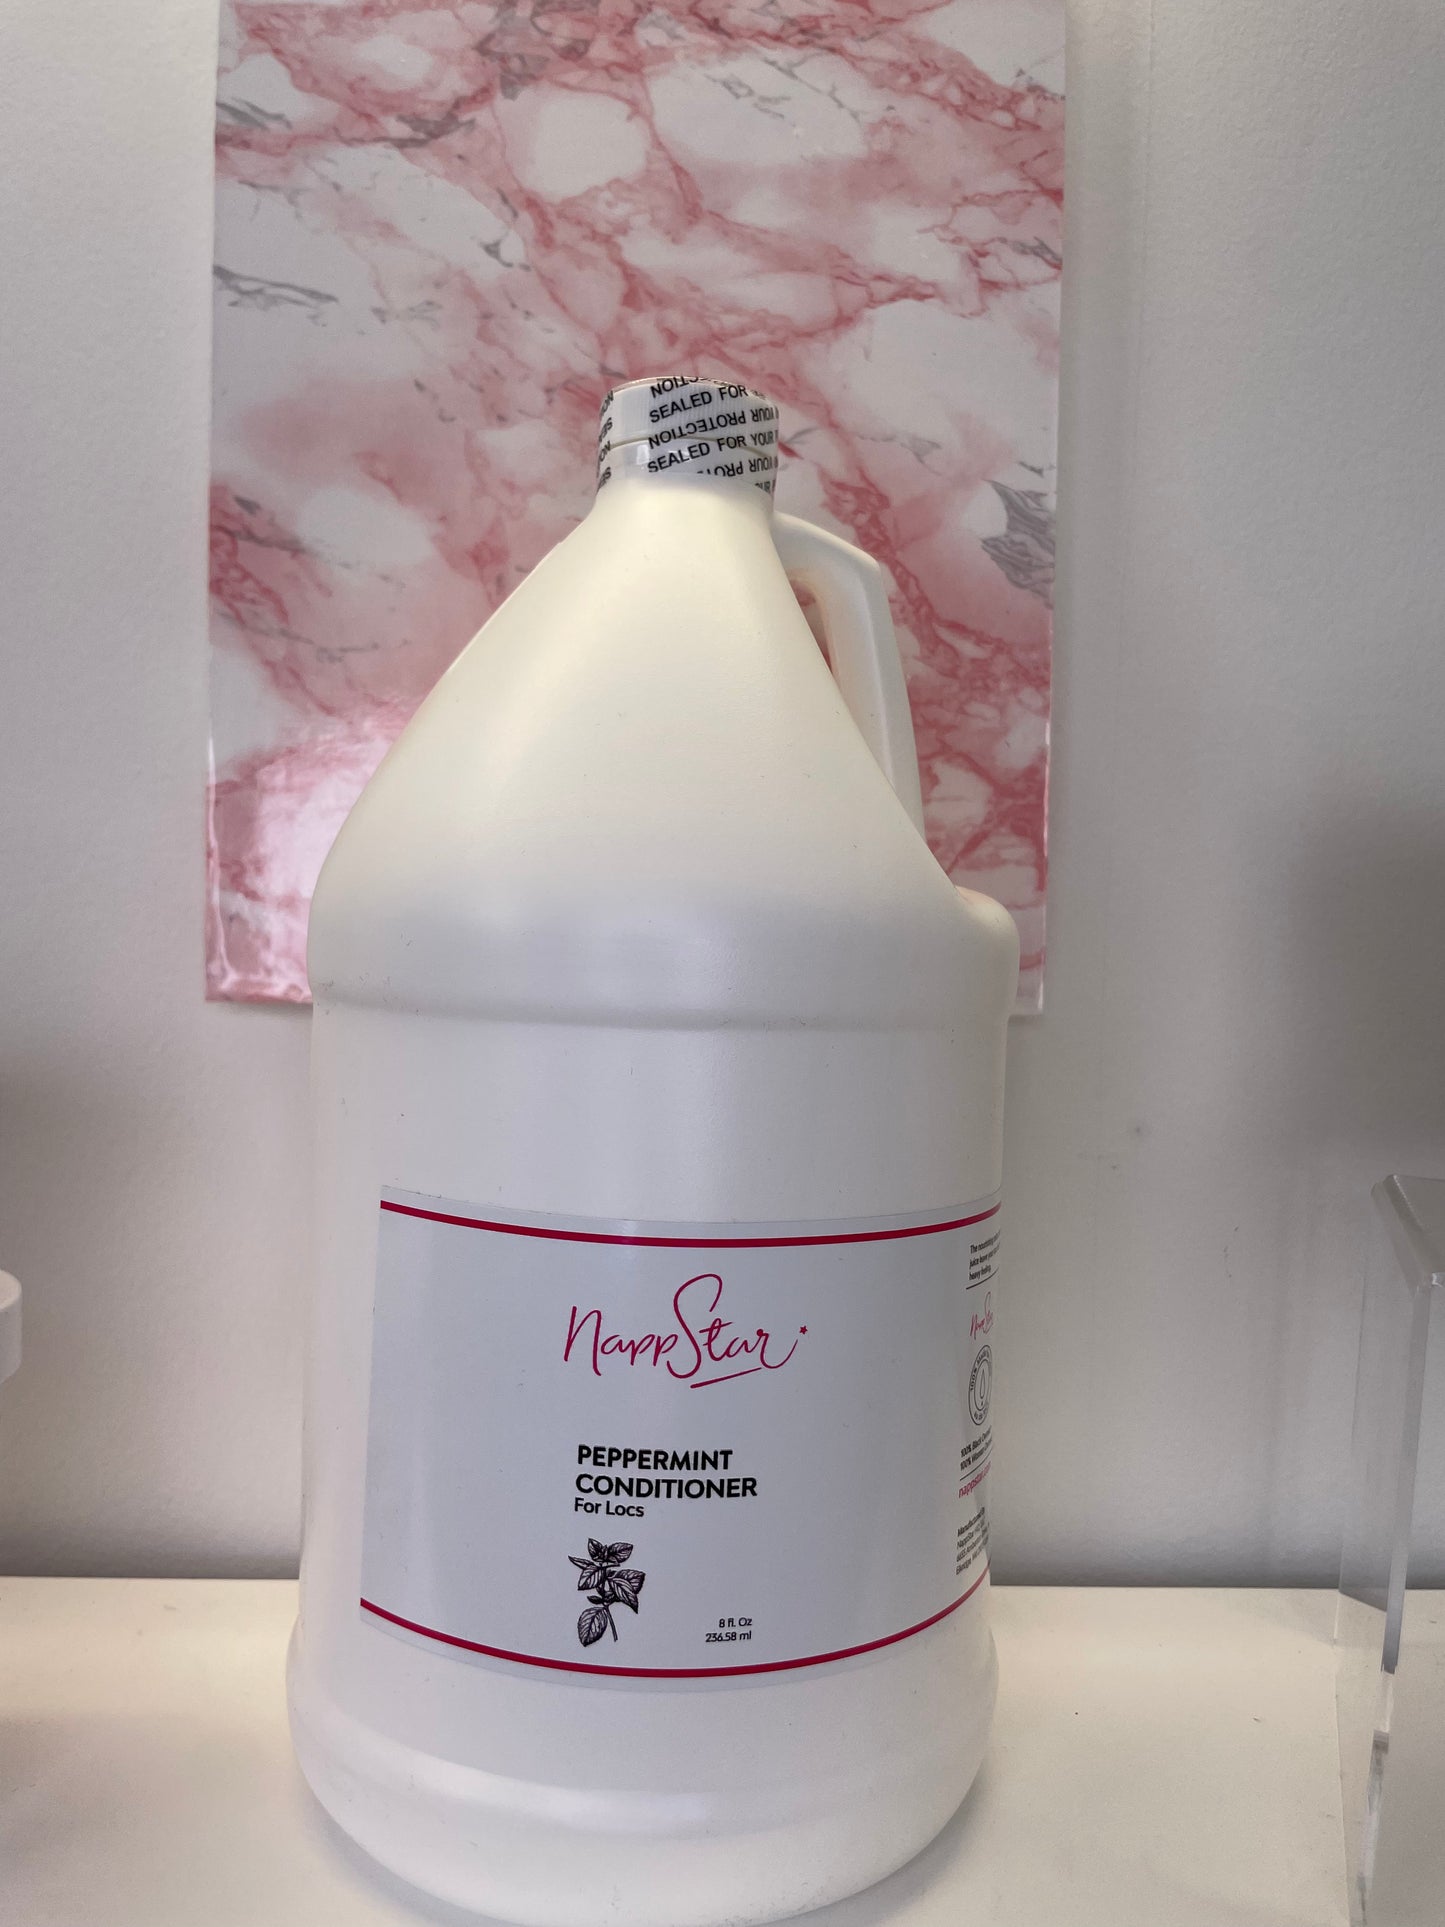 WHOLESALE: Peppermint Conditioner